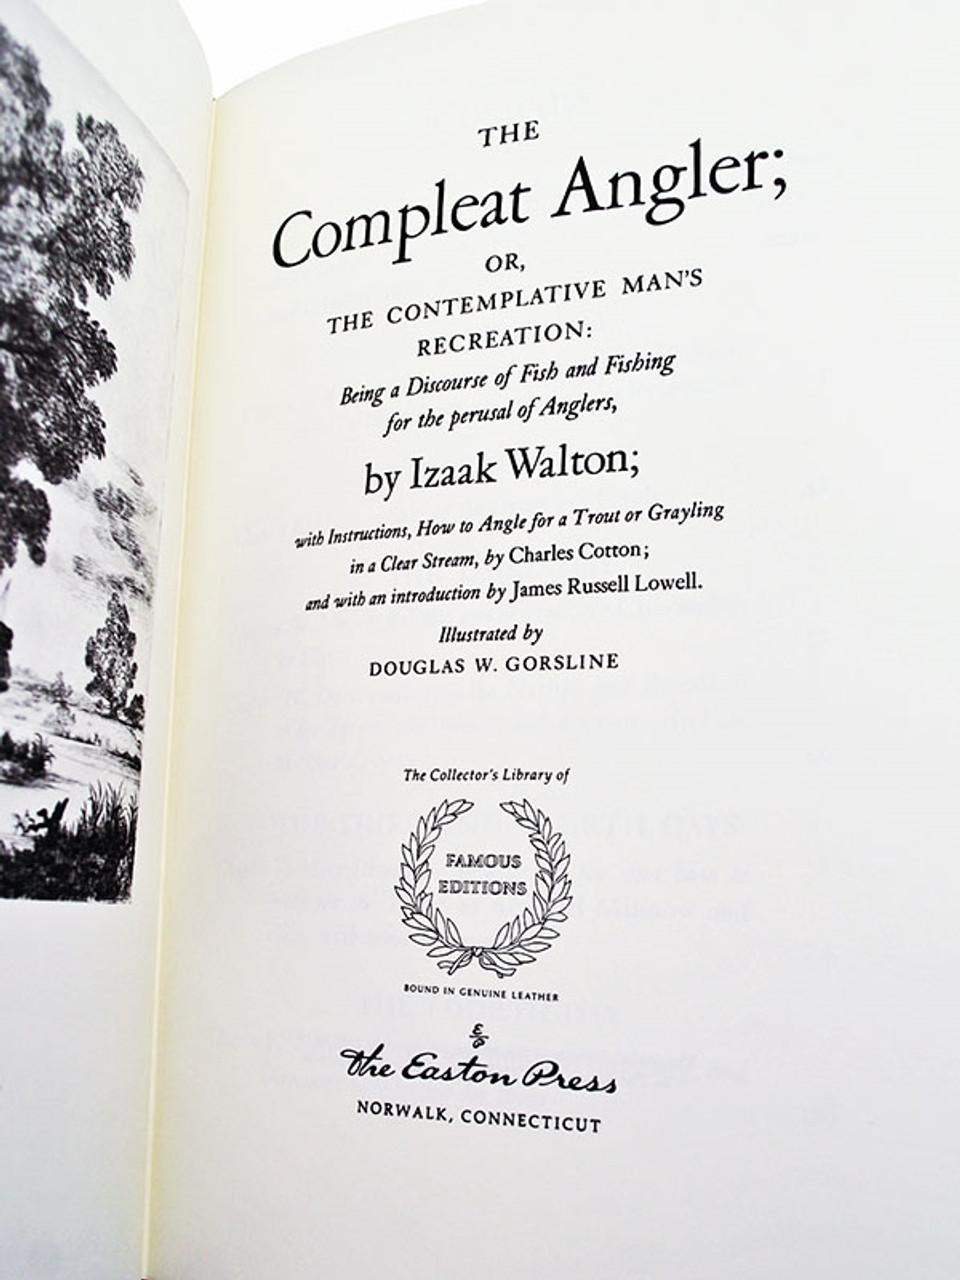 Easton Press, Izaak Walton "The Compleat Angler" Leather Bound Collector's Edition